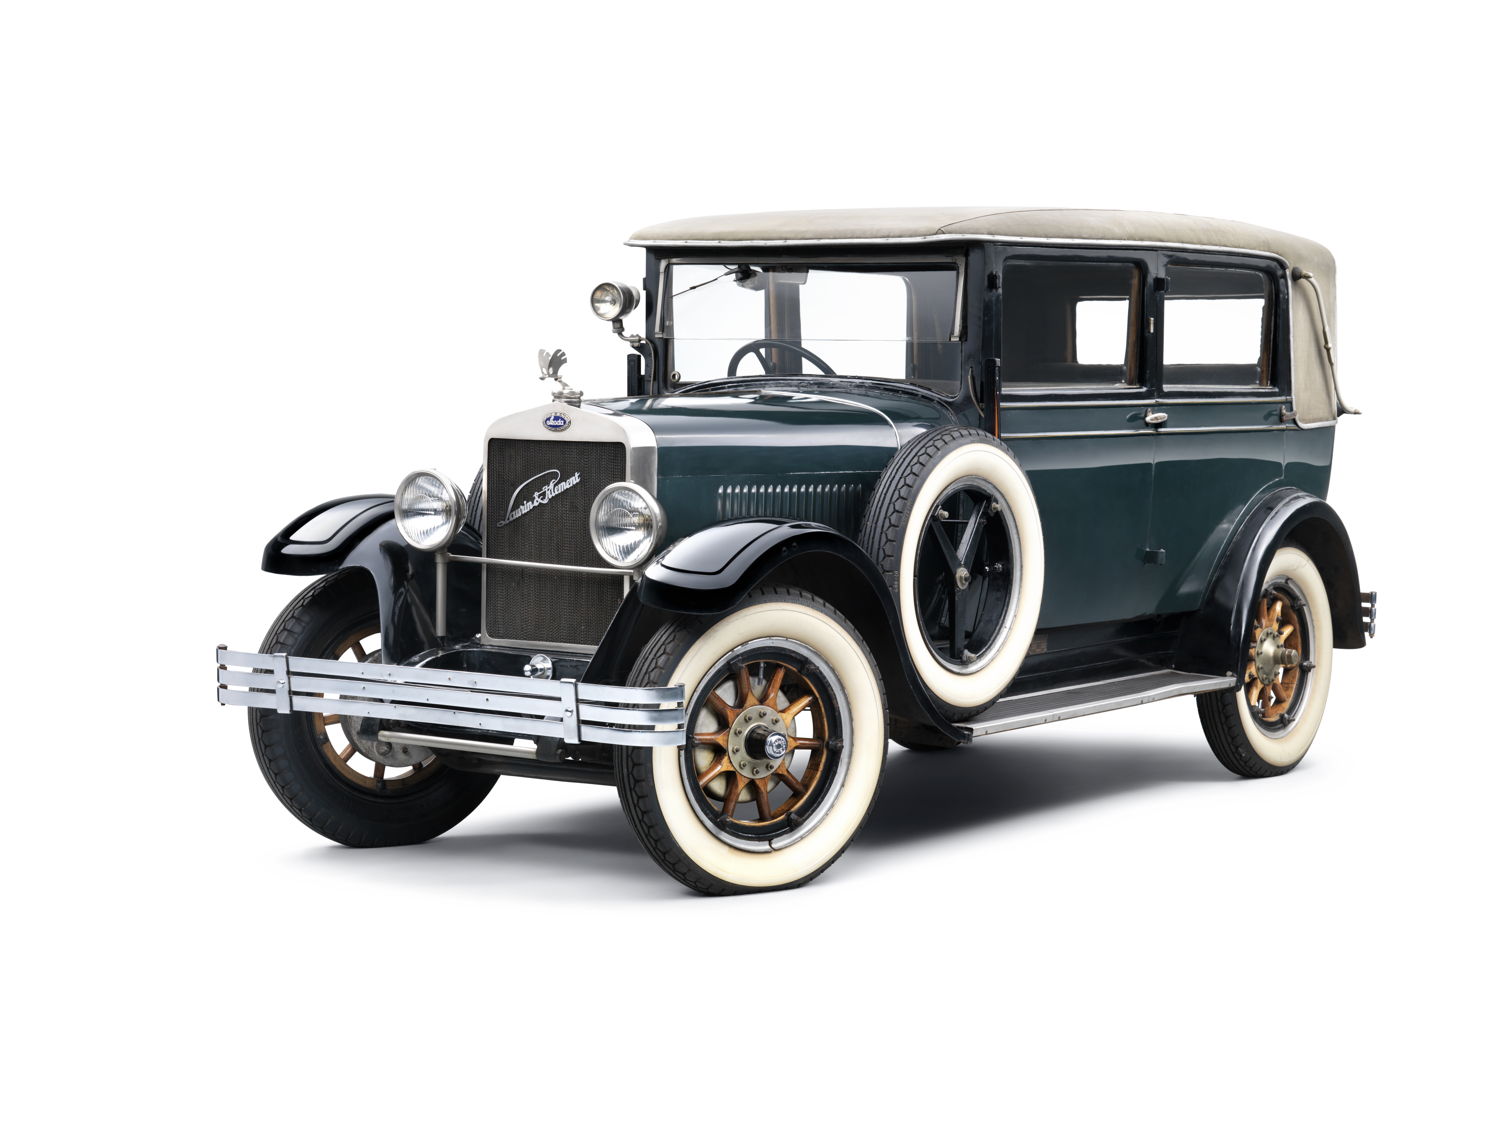 In 1925, the LAURIN & KLEMENT / ŠKODA 110 was
launched, and the car demonstrated the brand’s ingenuity
even back then. This is because the manufacturer used a
uniform ladder-frame chassis with a wheelbase of
2,950 mm. which was available to customers in four
versions with an enclosed body and one roadster version.